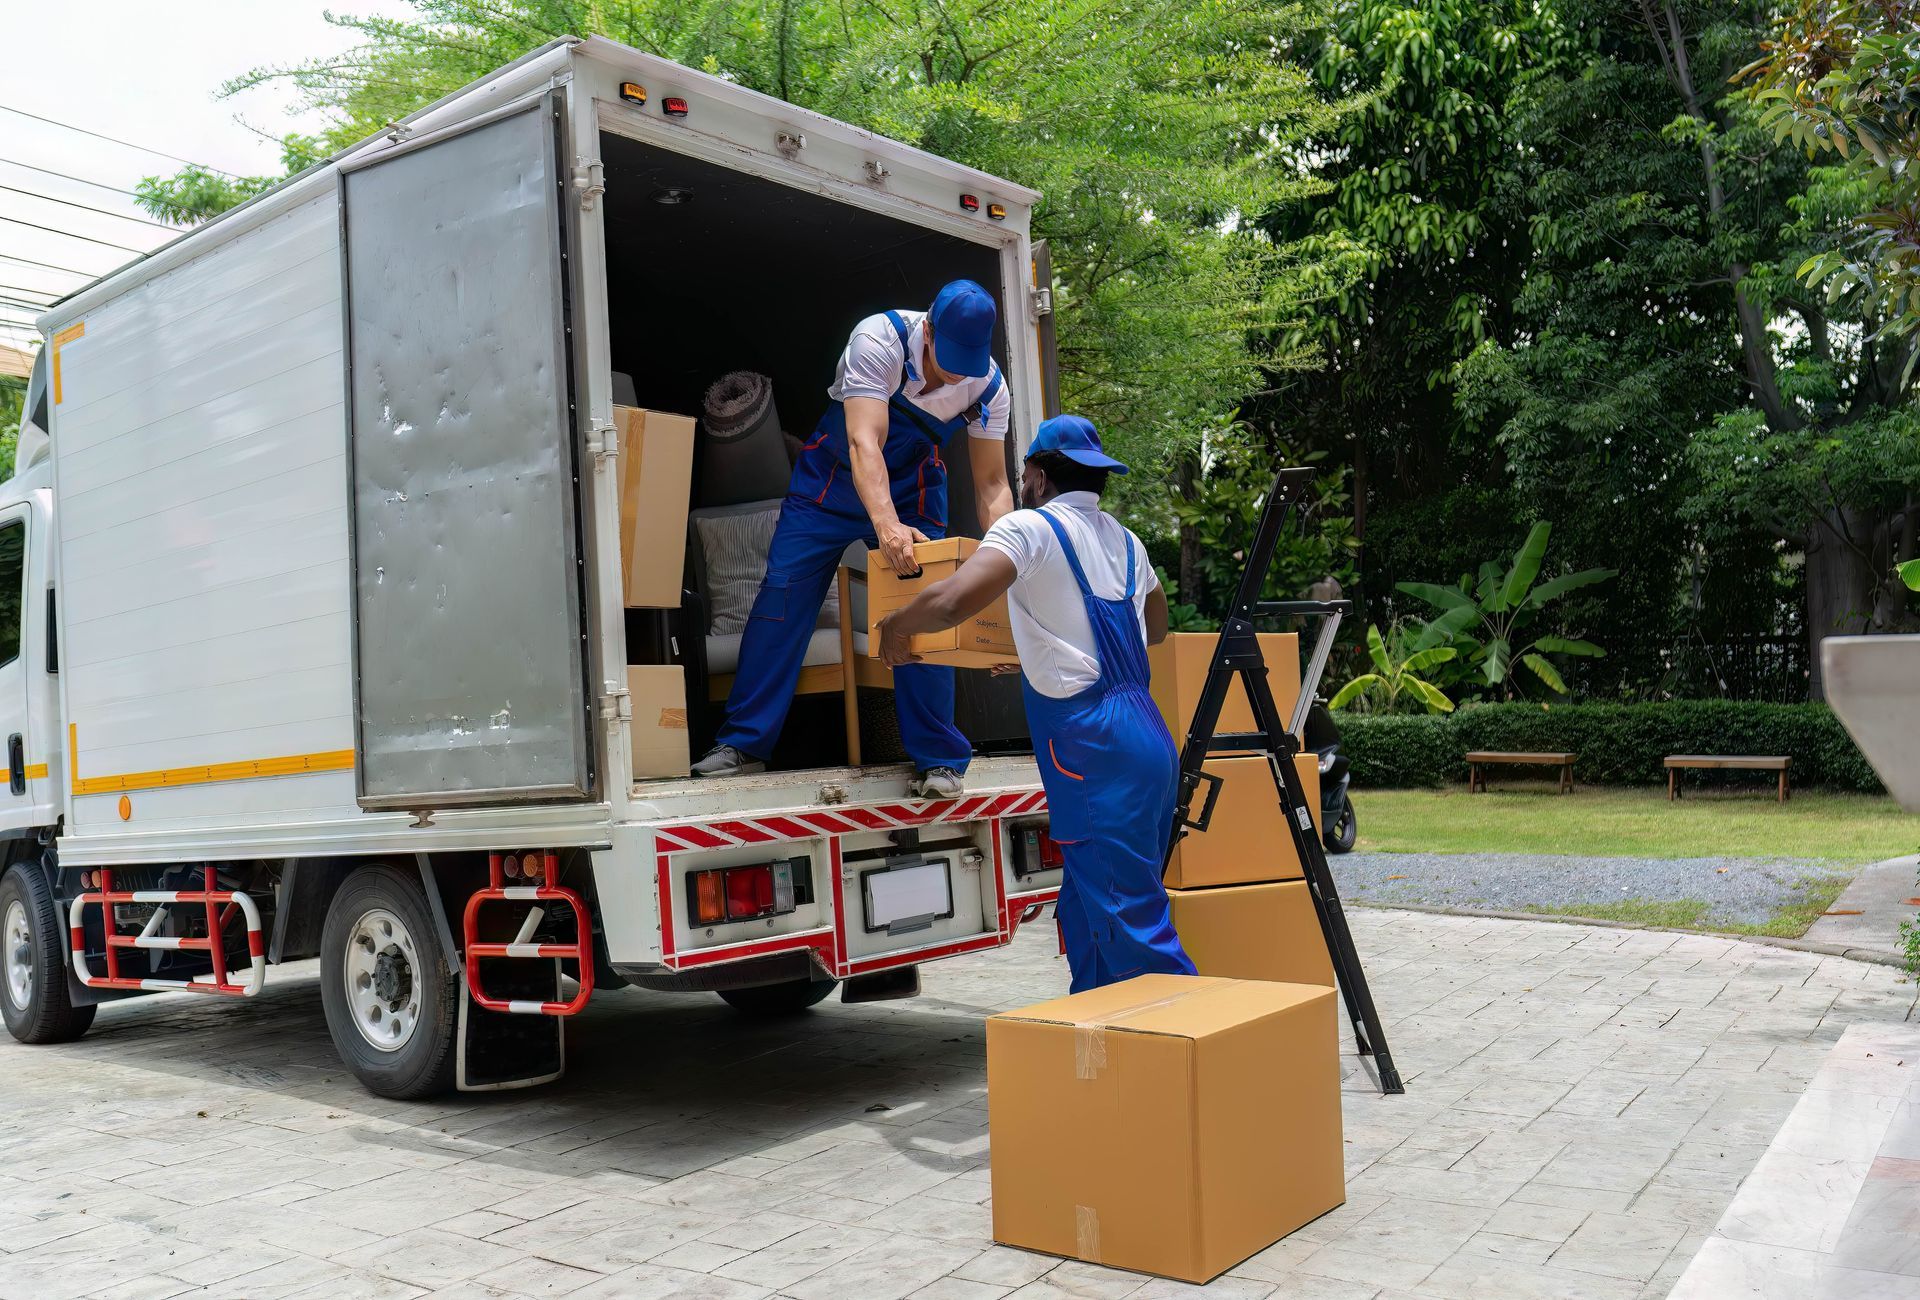 two men in blue overalls are loading boxes into a truck